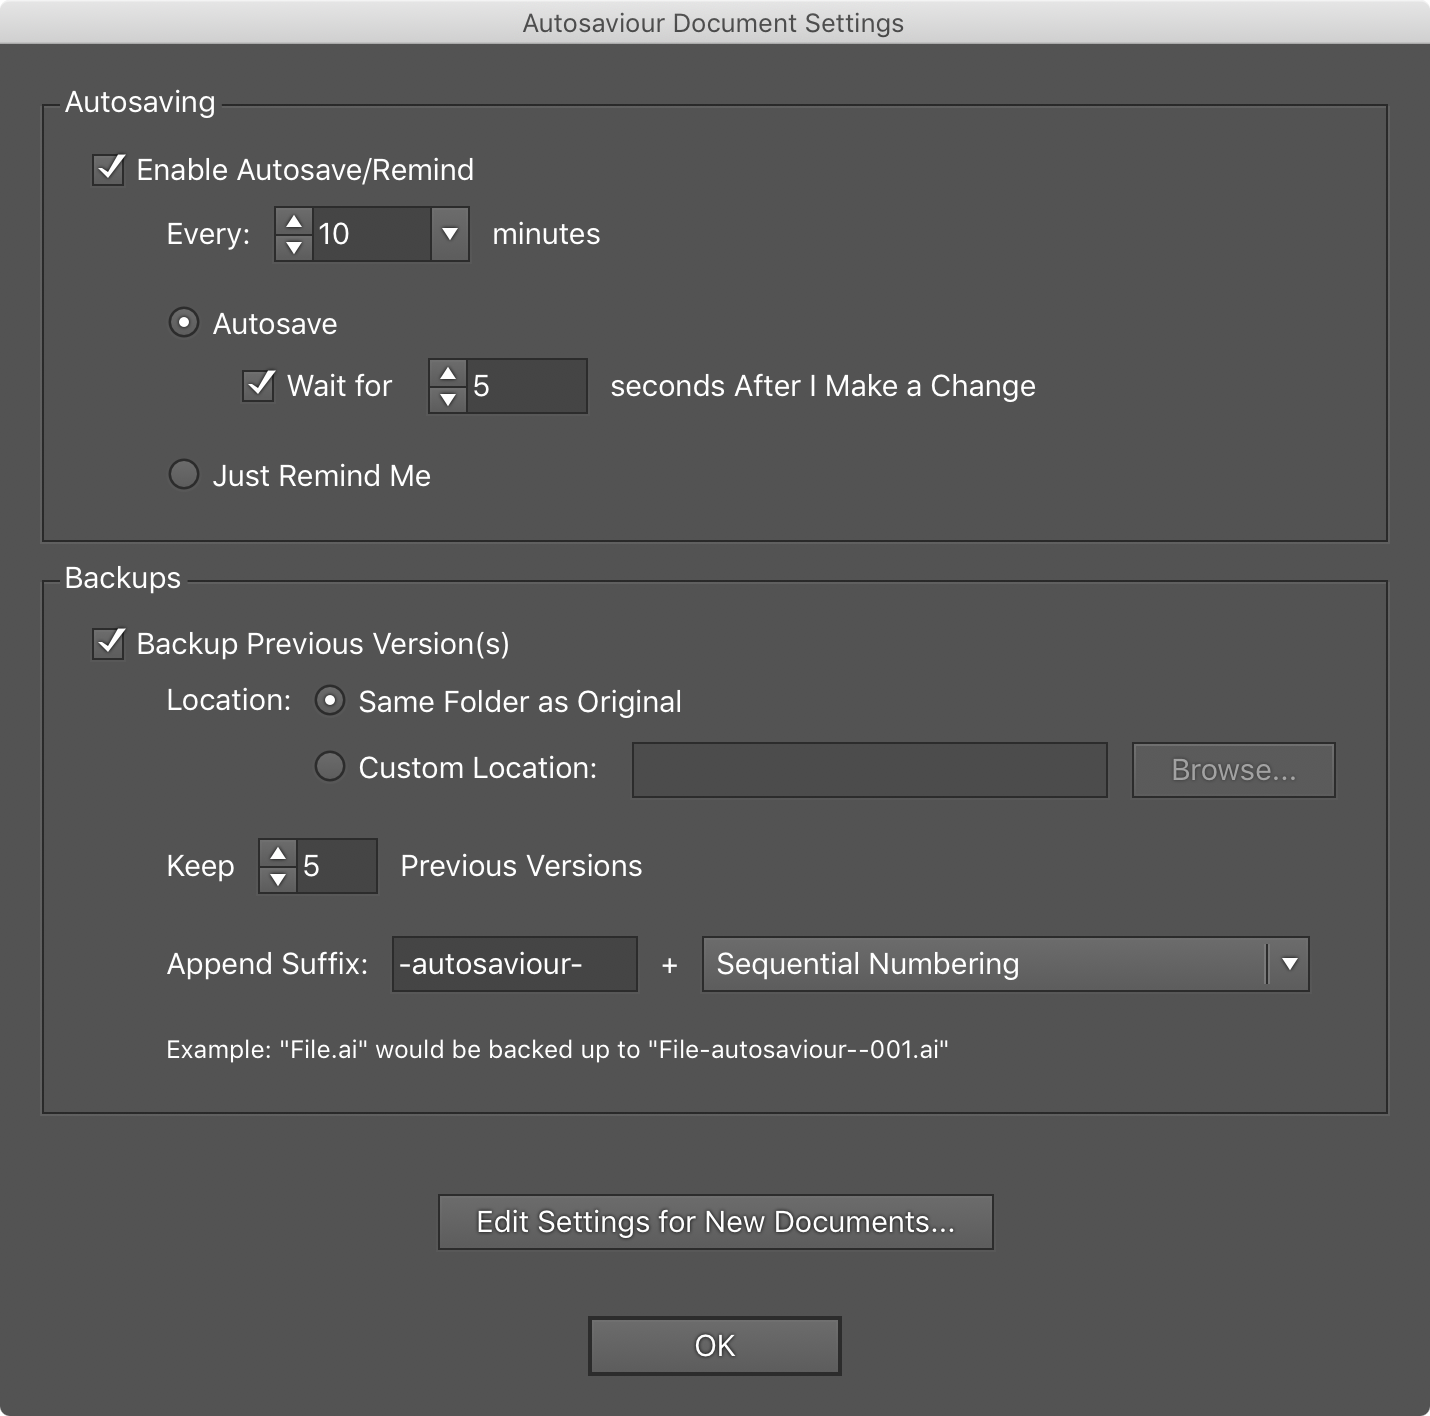 how to resize image in illustrator without losing quality